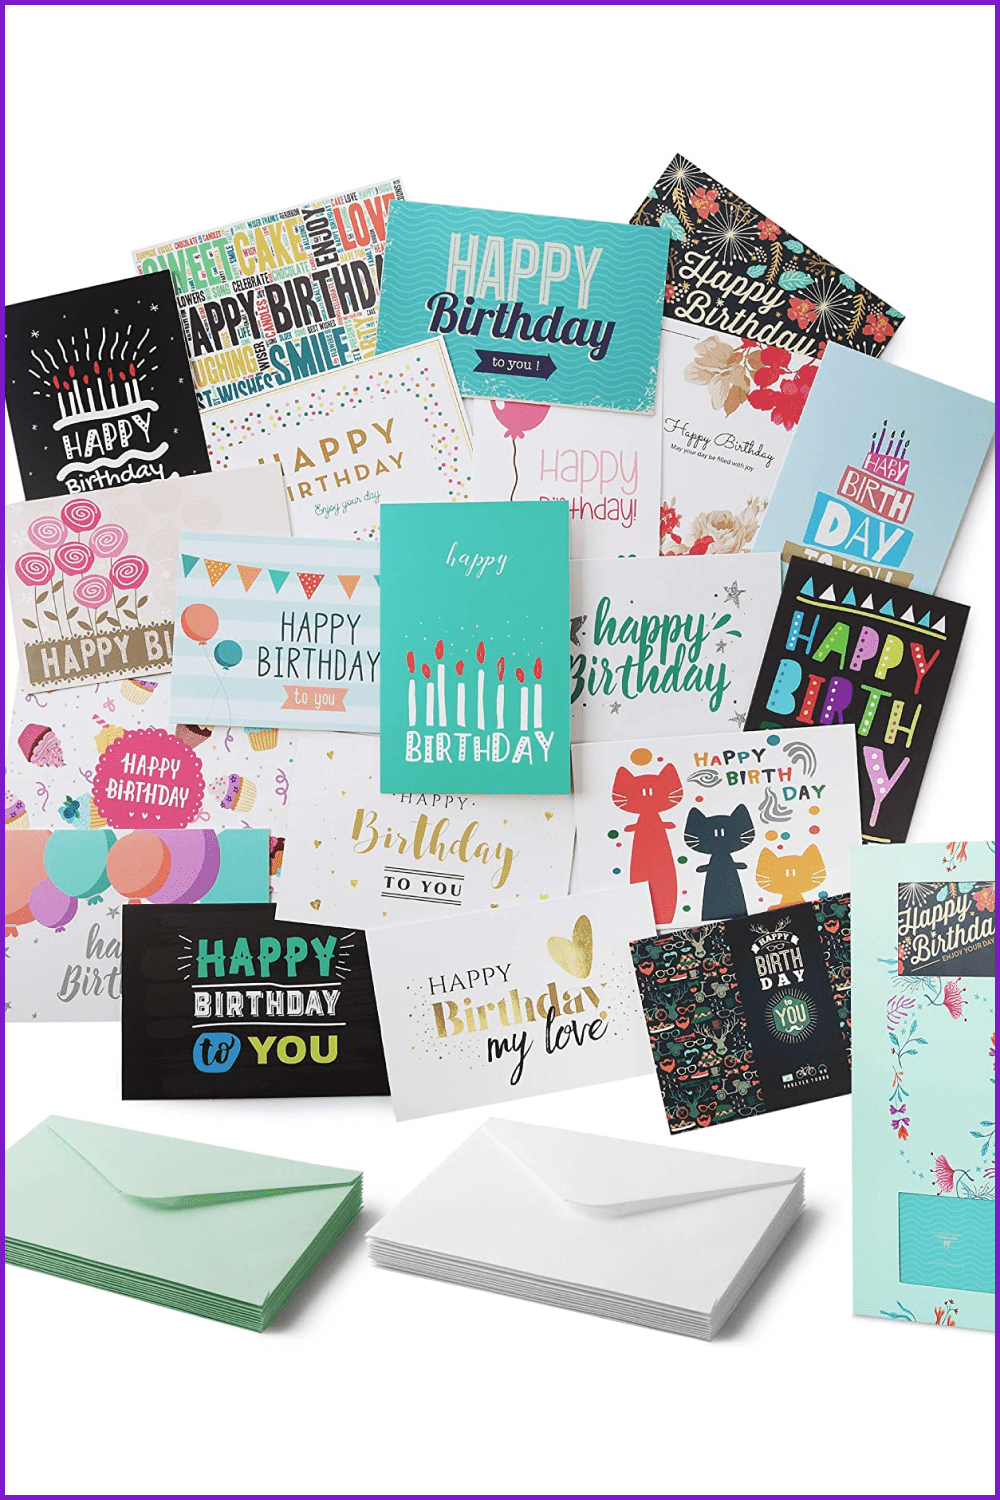 Photo of a variety of birthday cards next to envelopes.